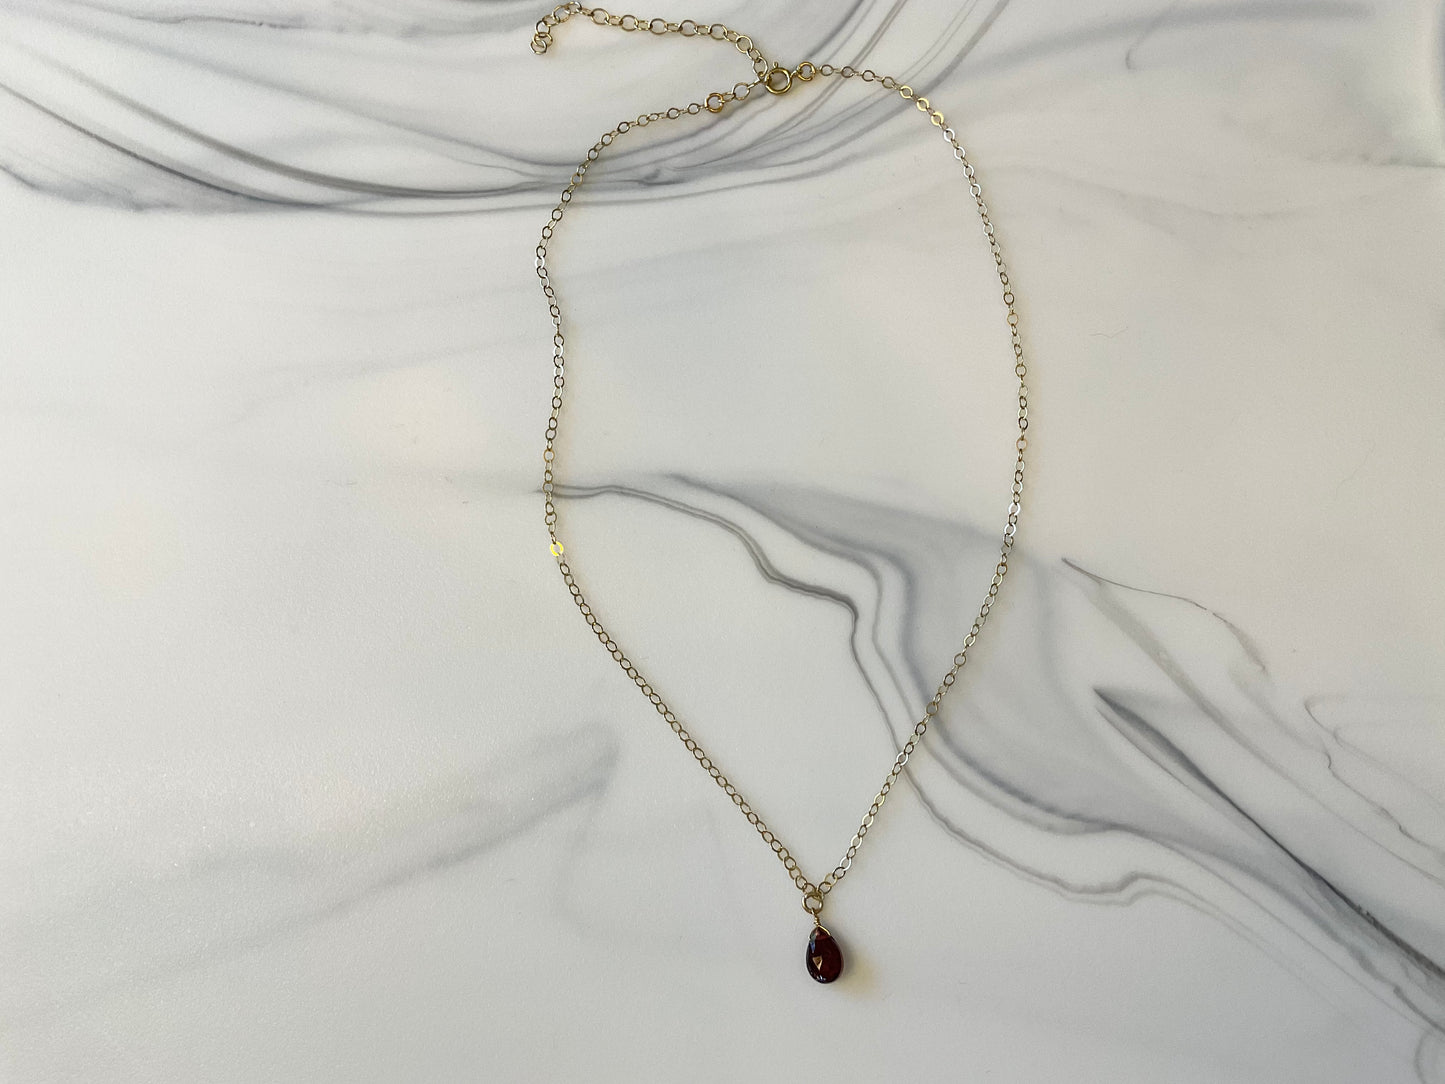 Layering Set of Garnet Necklaces with Matching Earrings